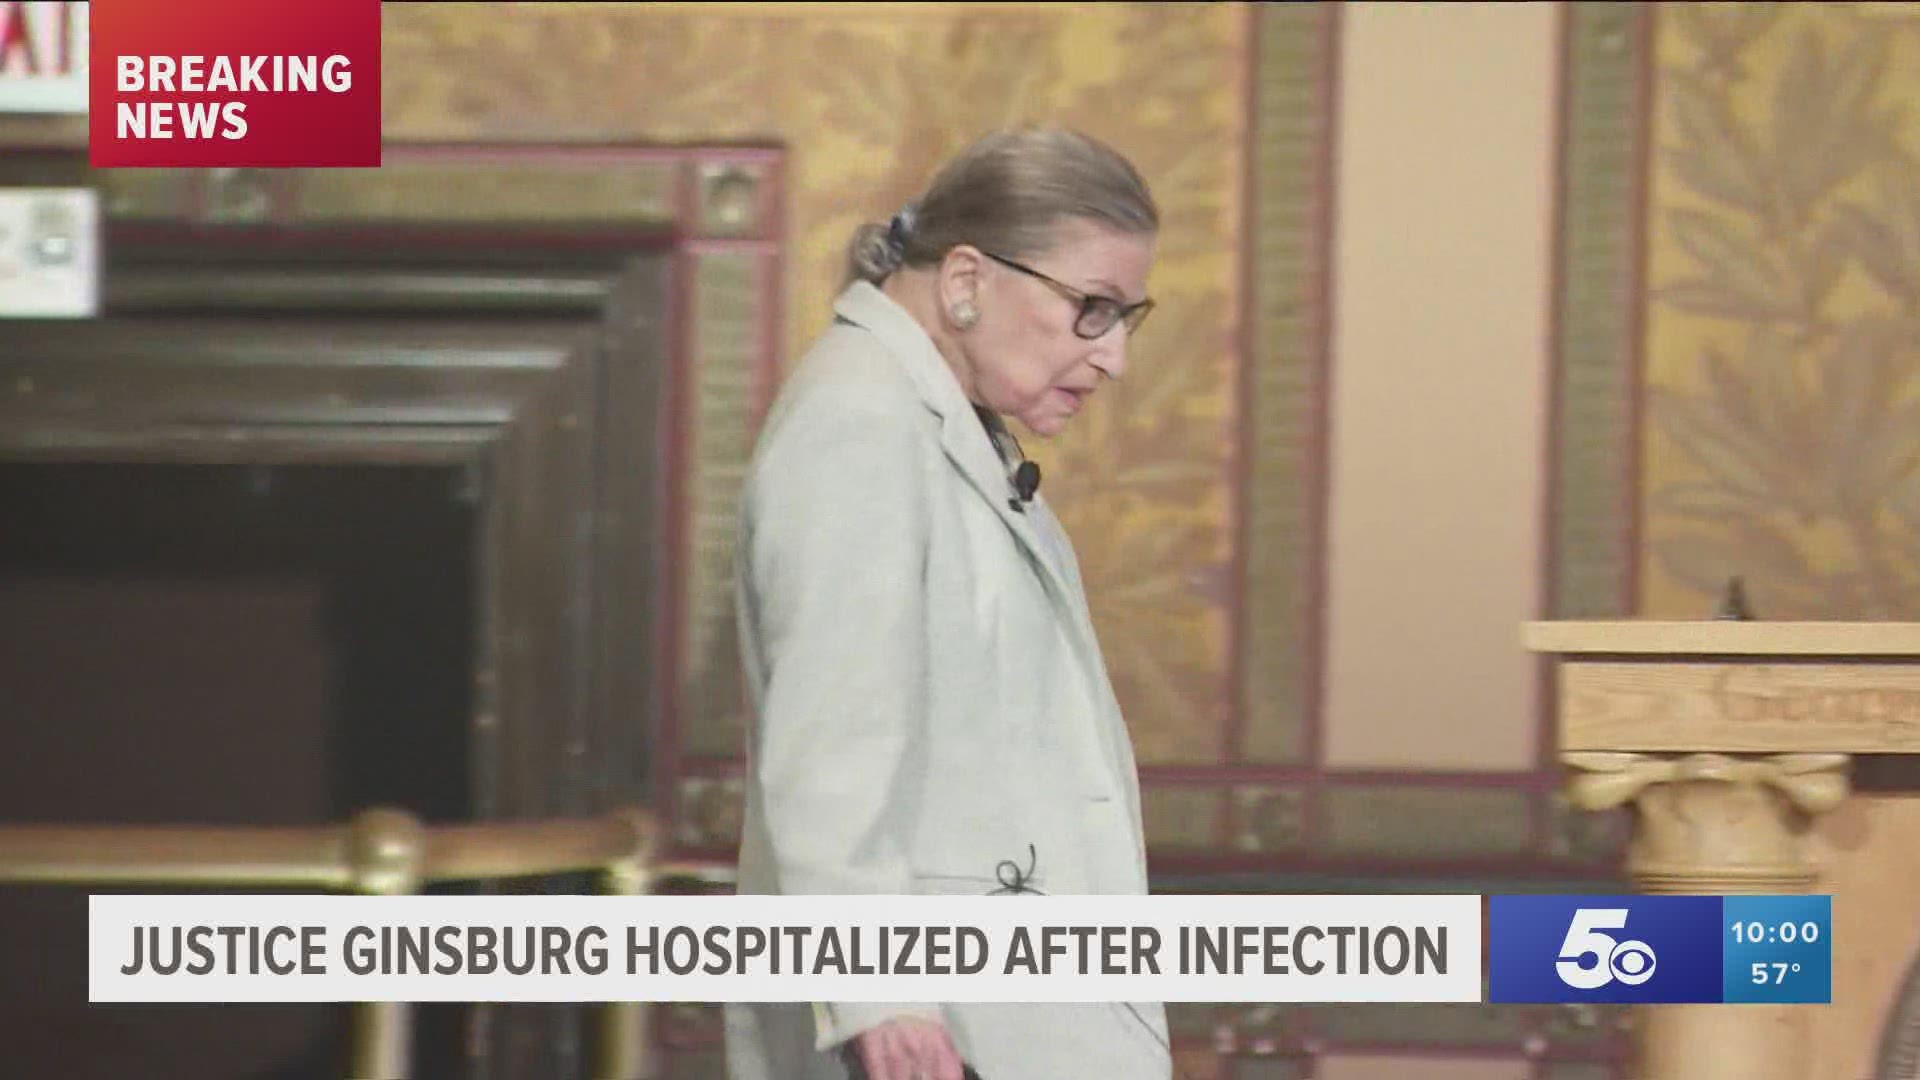 Justice Ginsburg hospitalized after infection